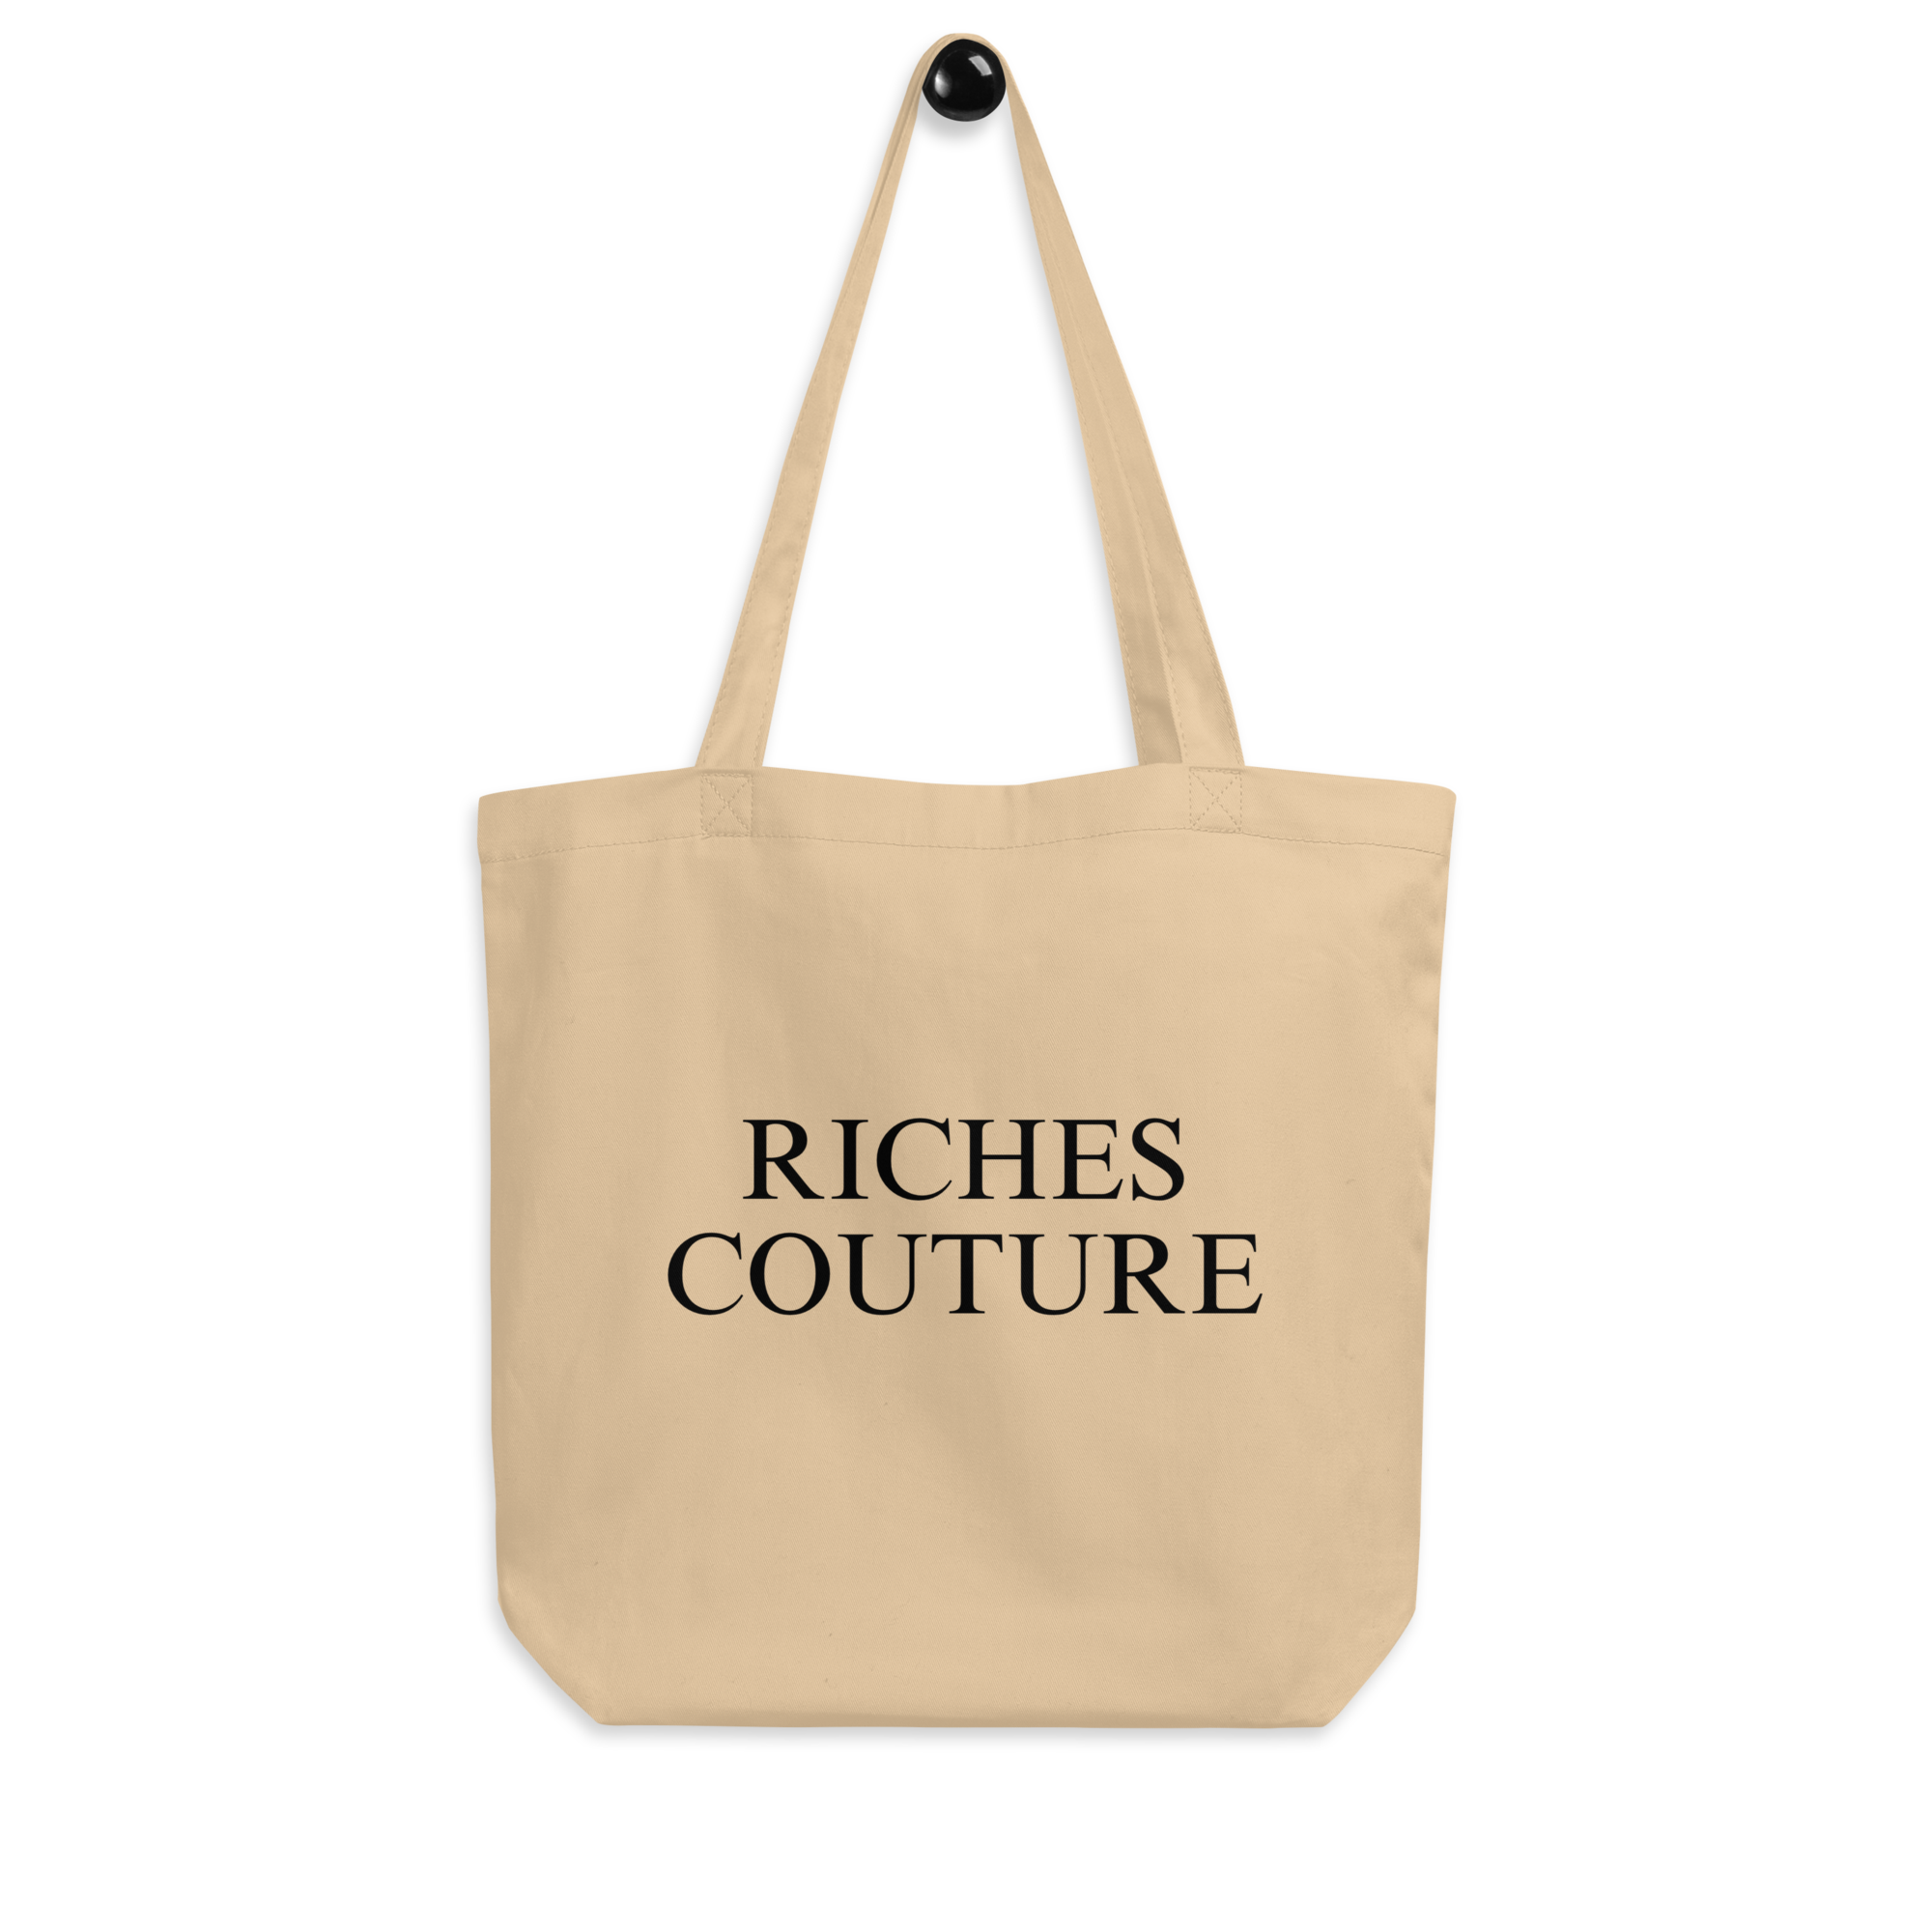 Riches Couture Tote Bag